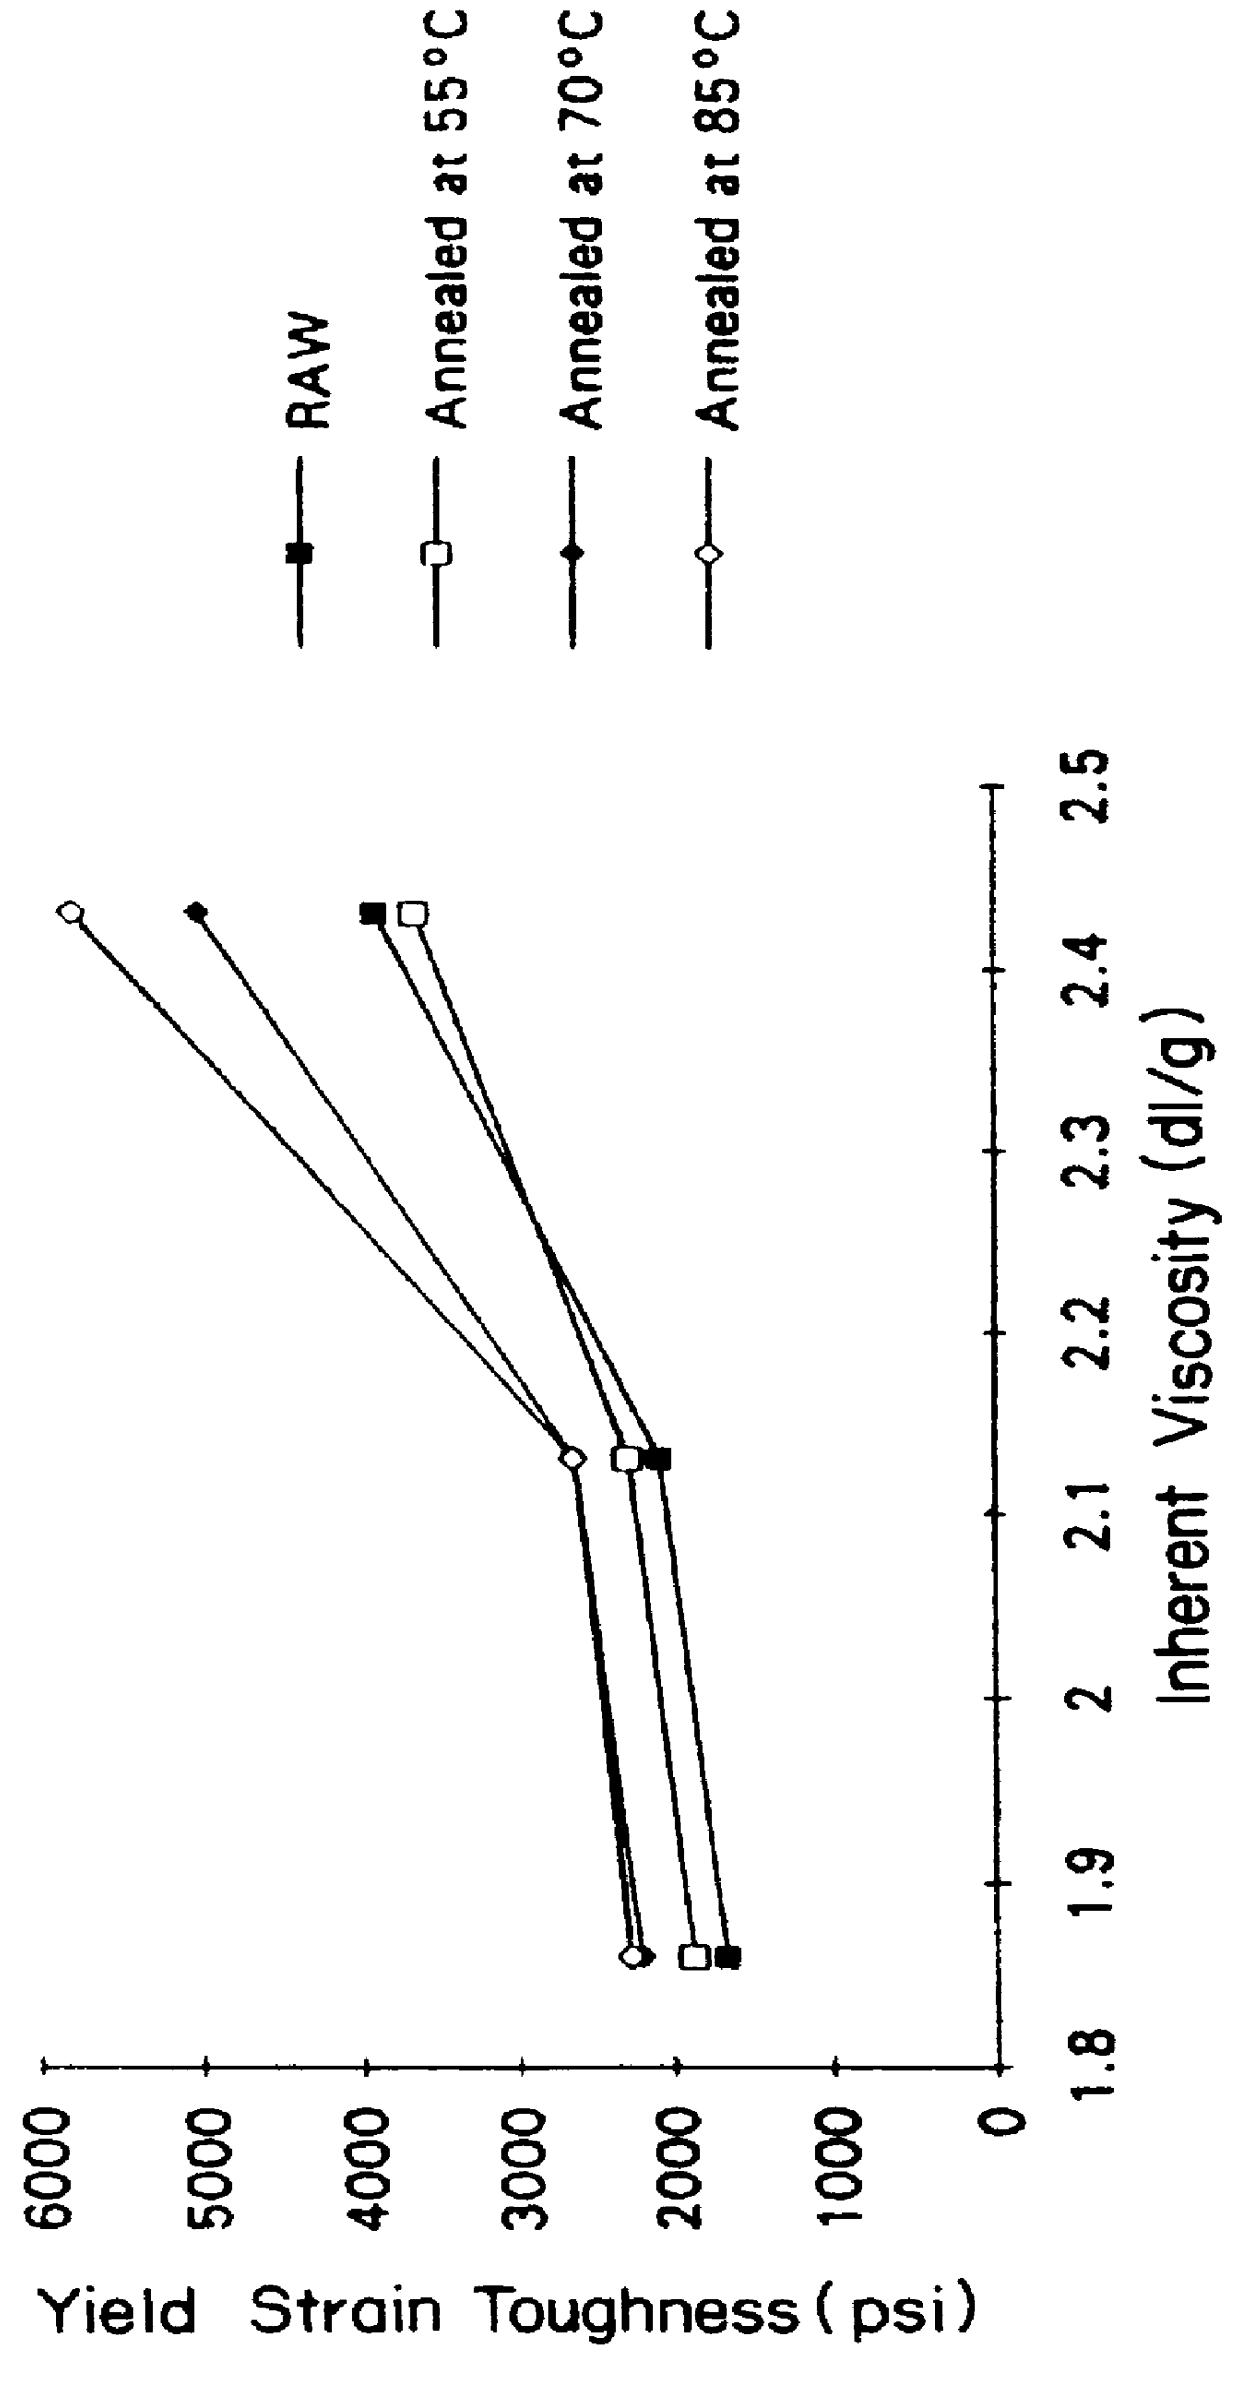 Medical devices containing high inherent viscosity poly(p-dioxanone)